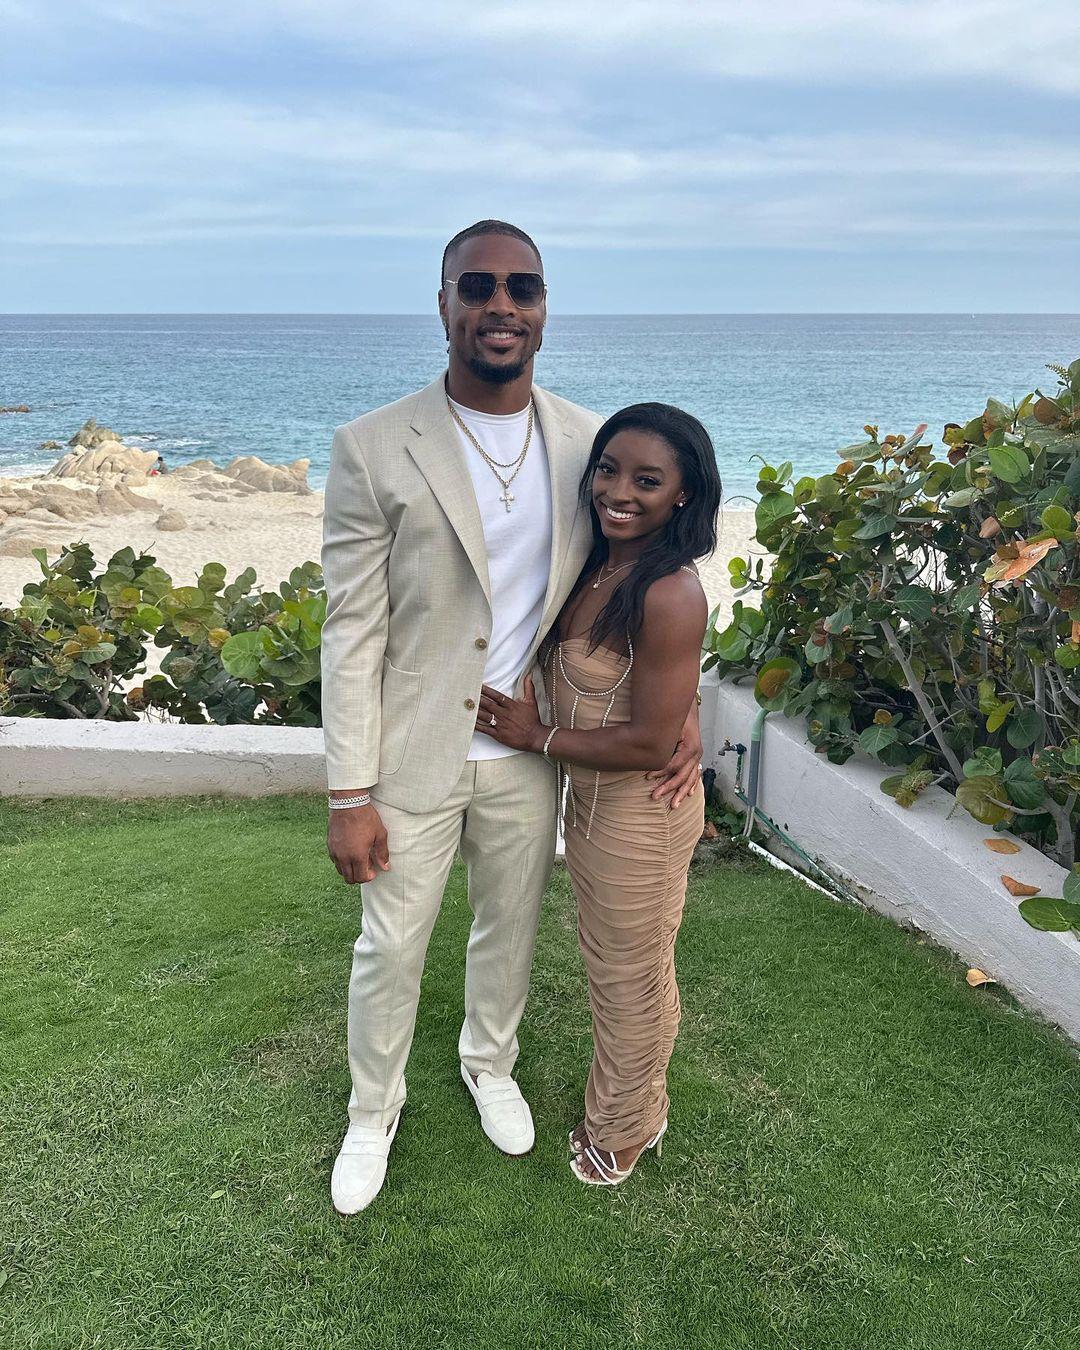 Jonathan Owens and Simone Biles posing in front of the beach